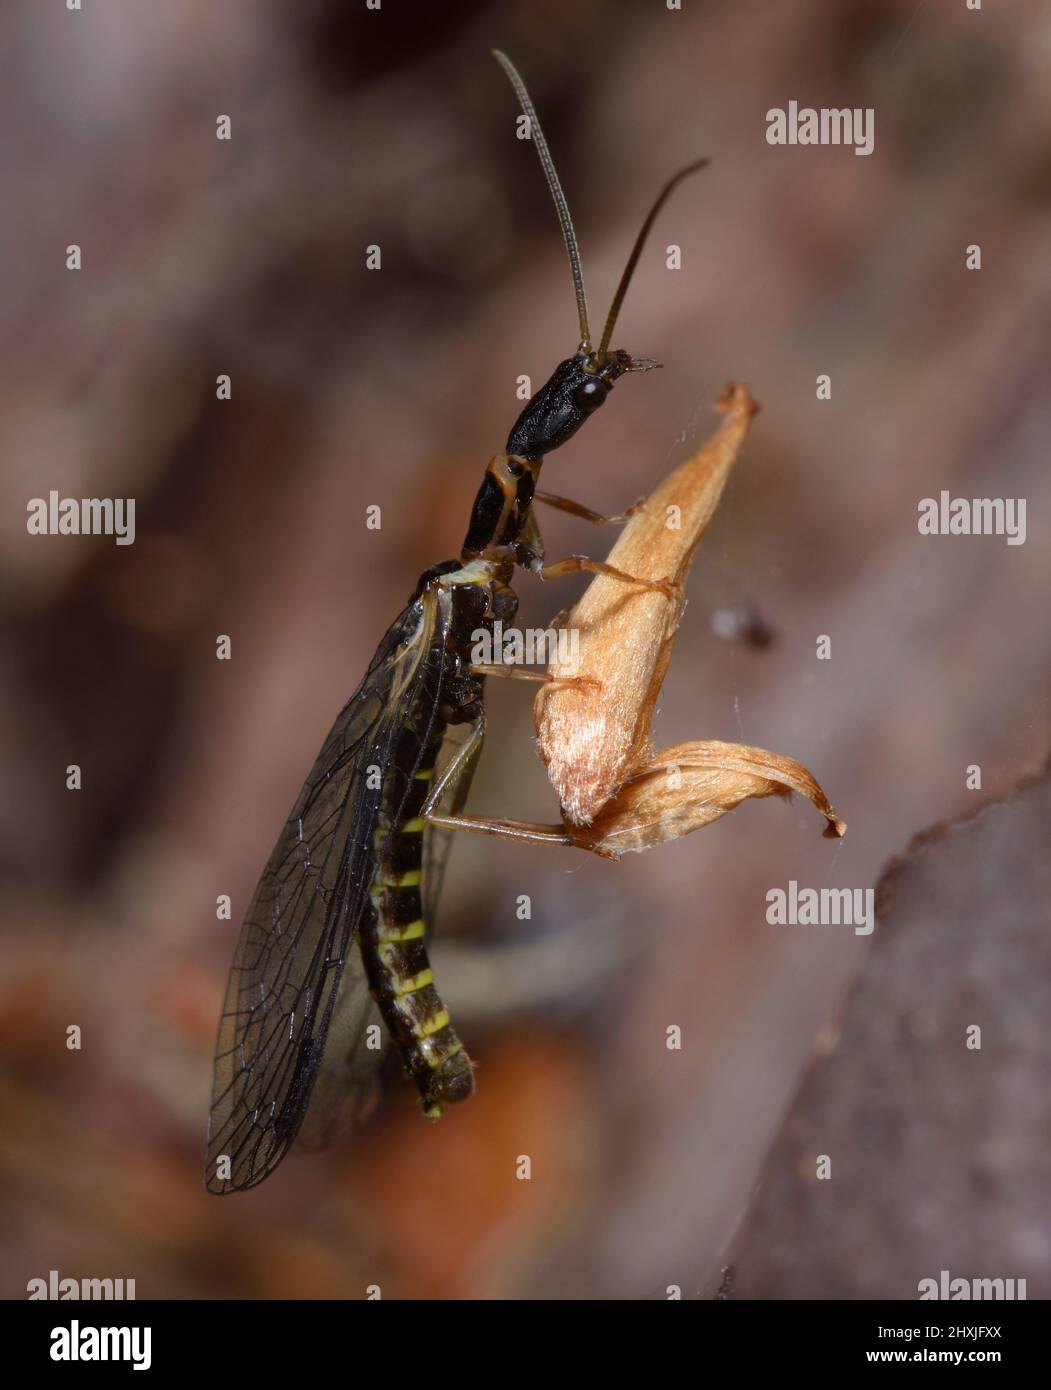 A snakefly, Raphidioptera, sitting on a piece of yellow leaf in front of brown blurred background. Stock Photo